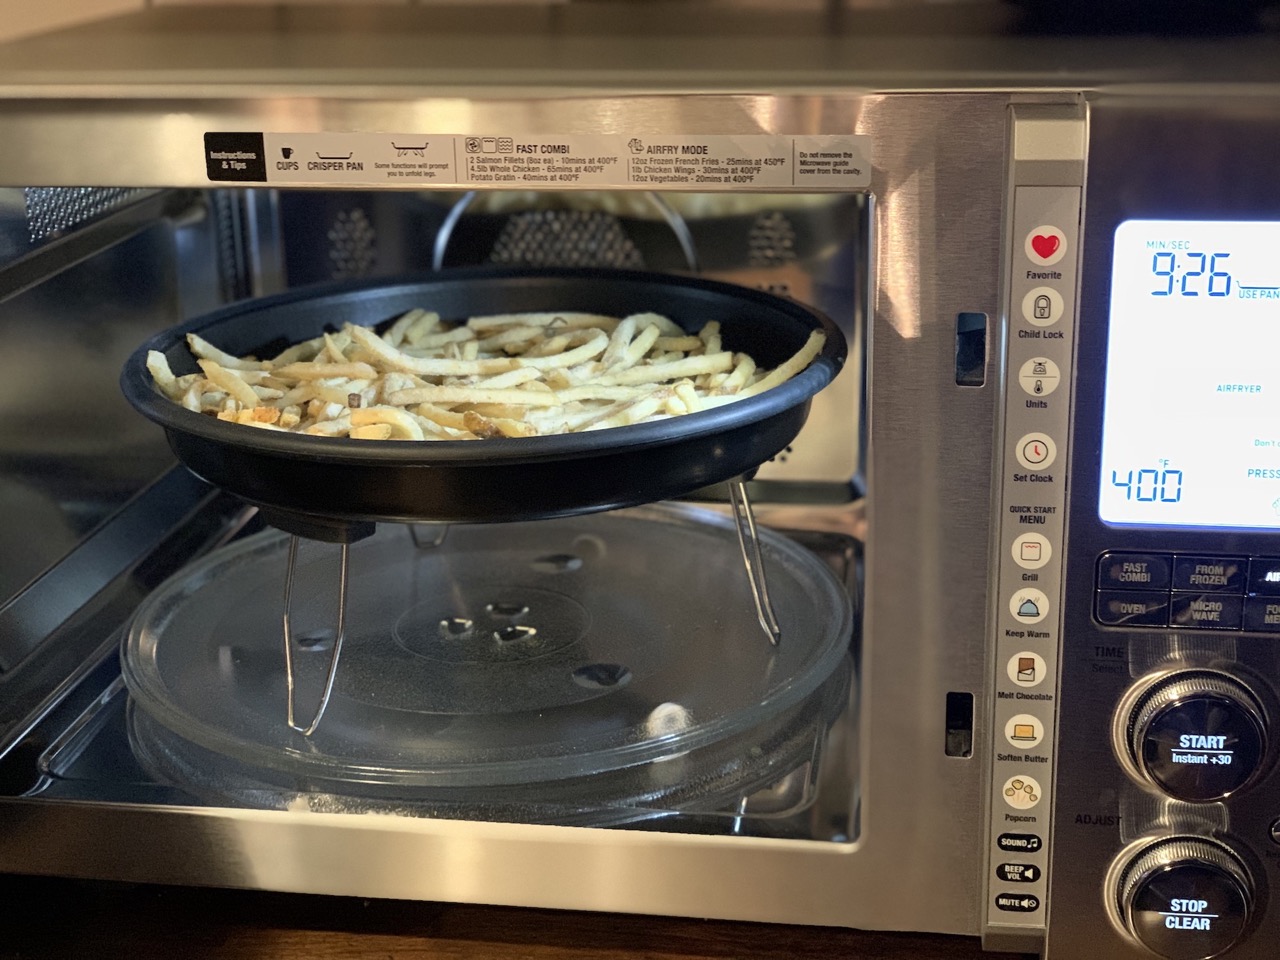 How Do You Cook French Fries In A Microwave Oven?